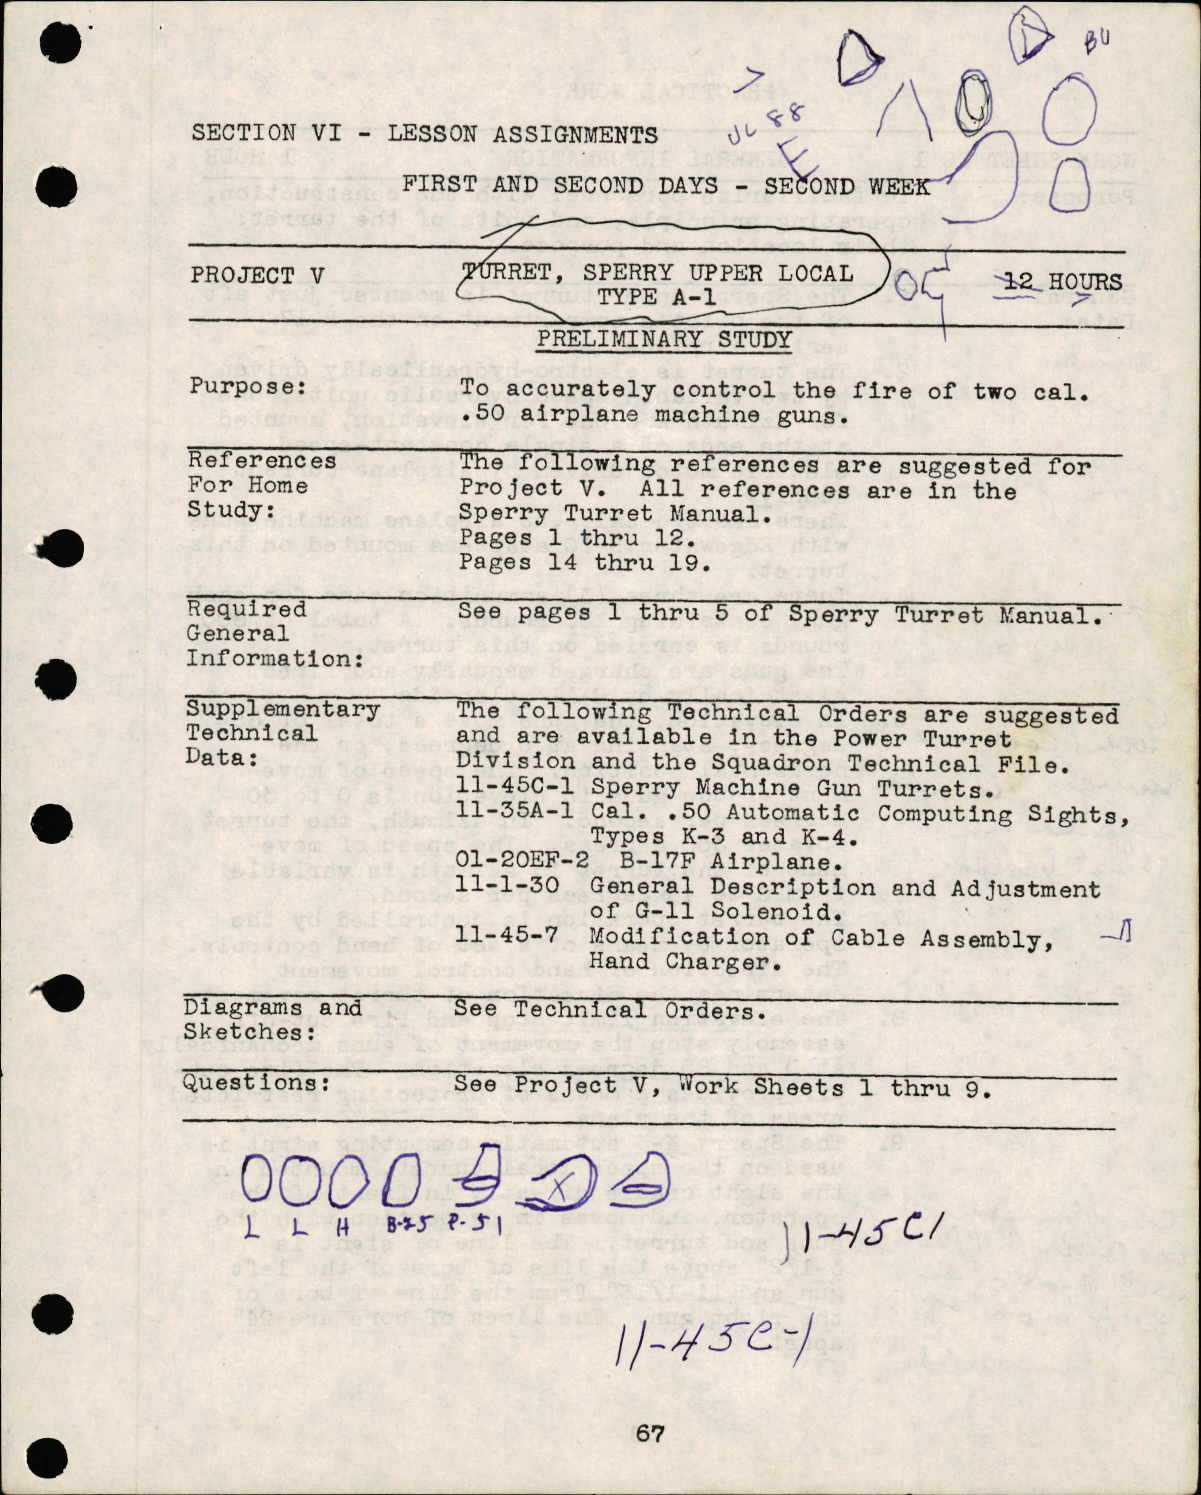 Sample page 1 from AirCorps Library document: Lesson Assignments for Turret, Sperry Upper Local Type A-1